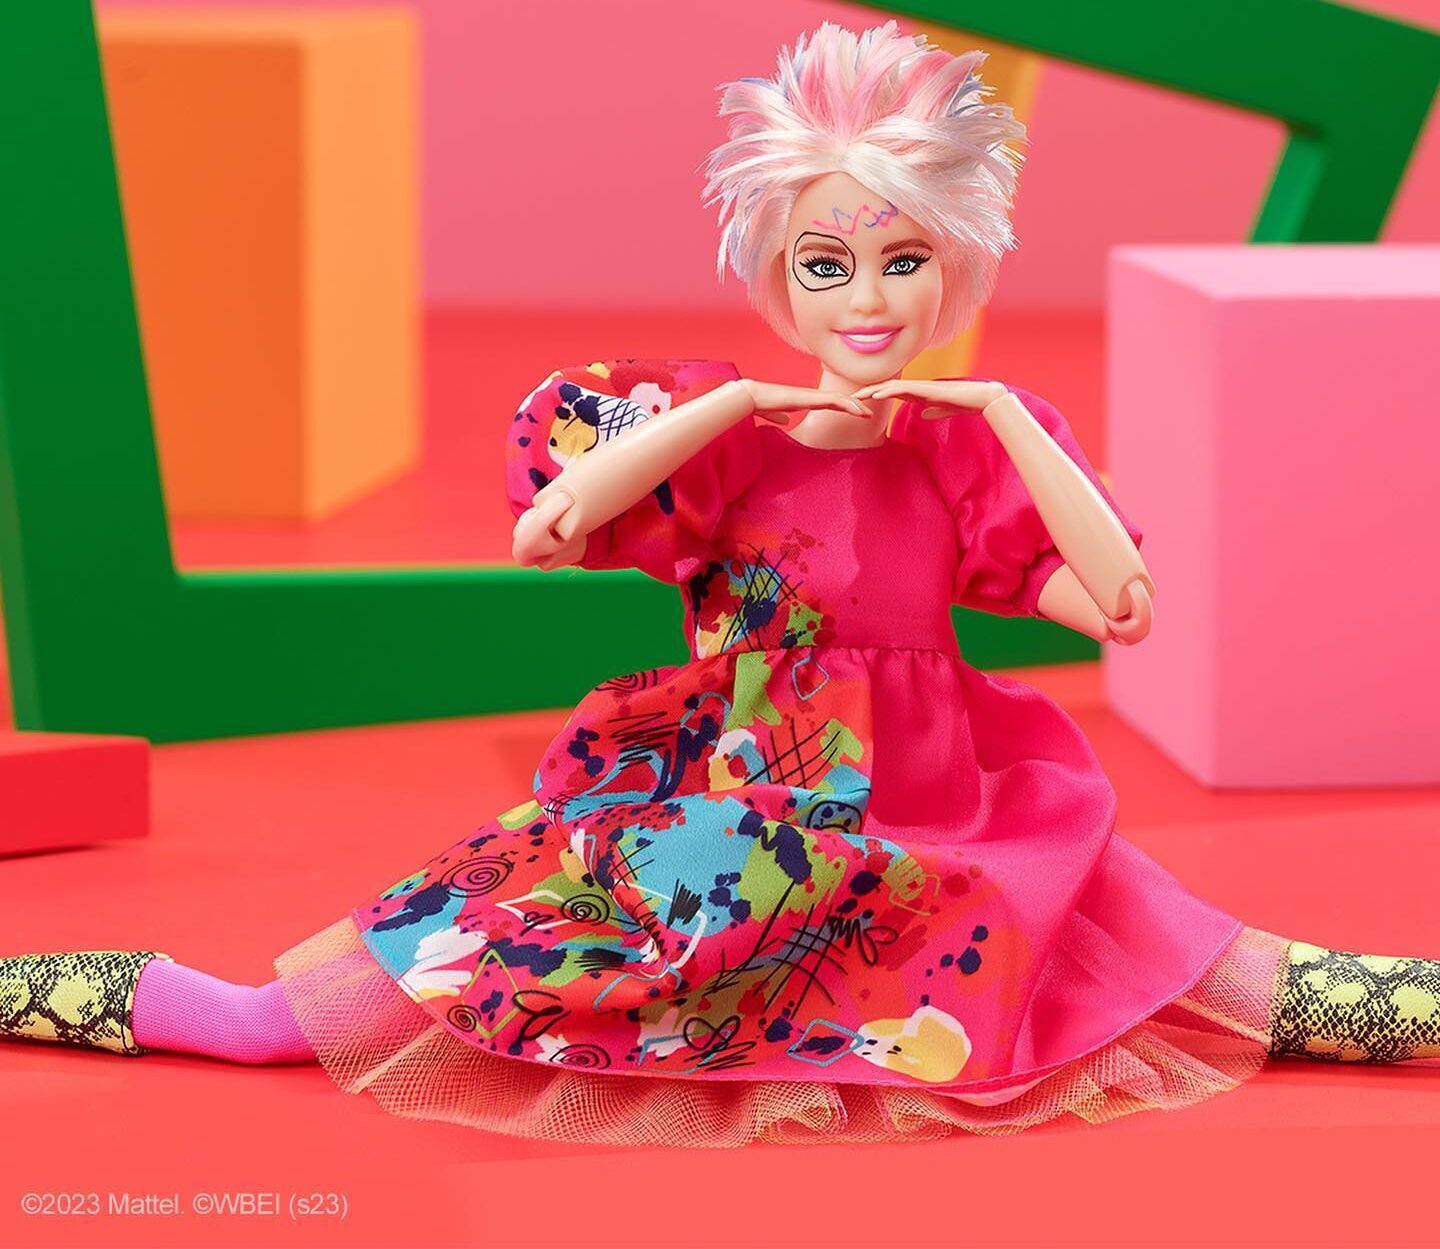 Mattel to Release Kate McKinnon's “Weird Barbie” Doll From the 